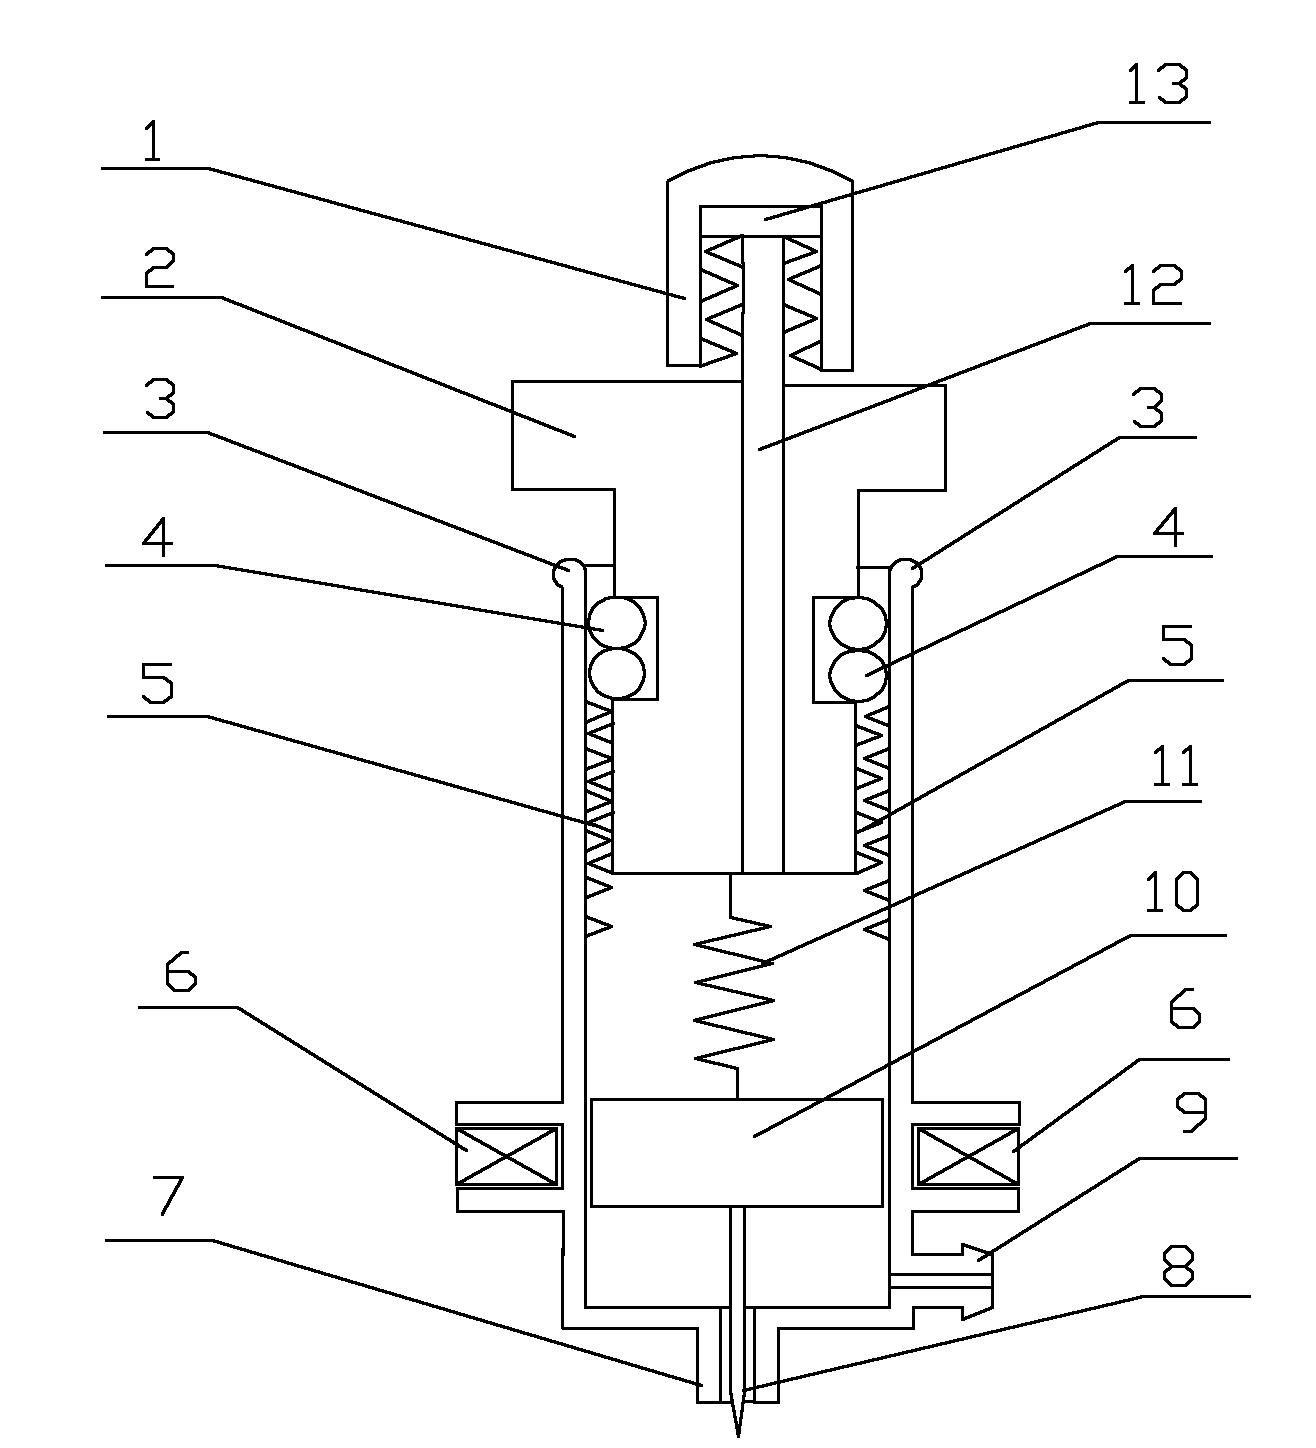 Electrospinning direct-writing nozzle capable of controlling starting and stopping